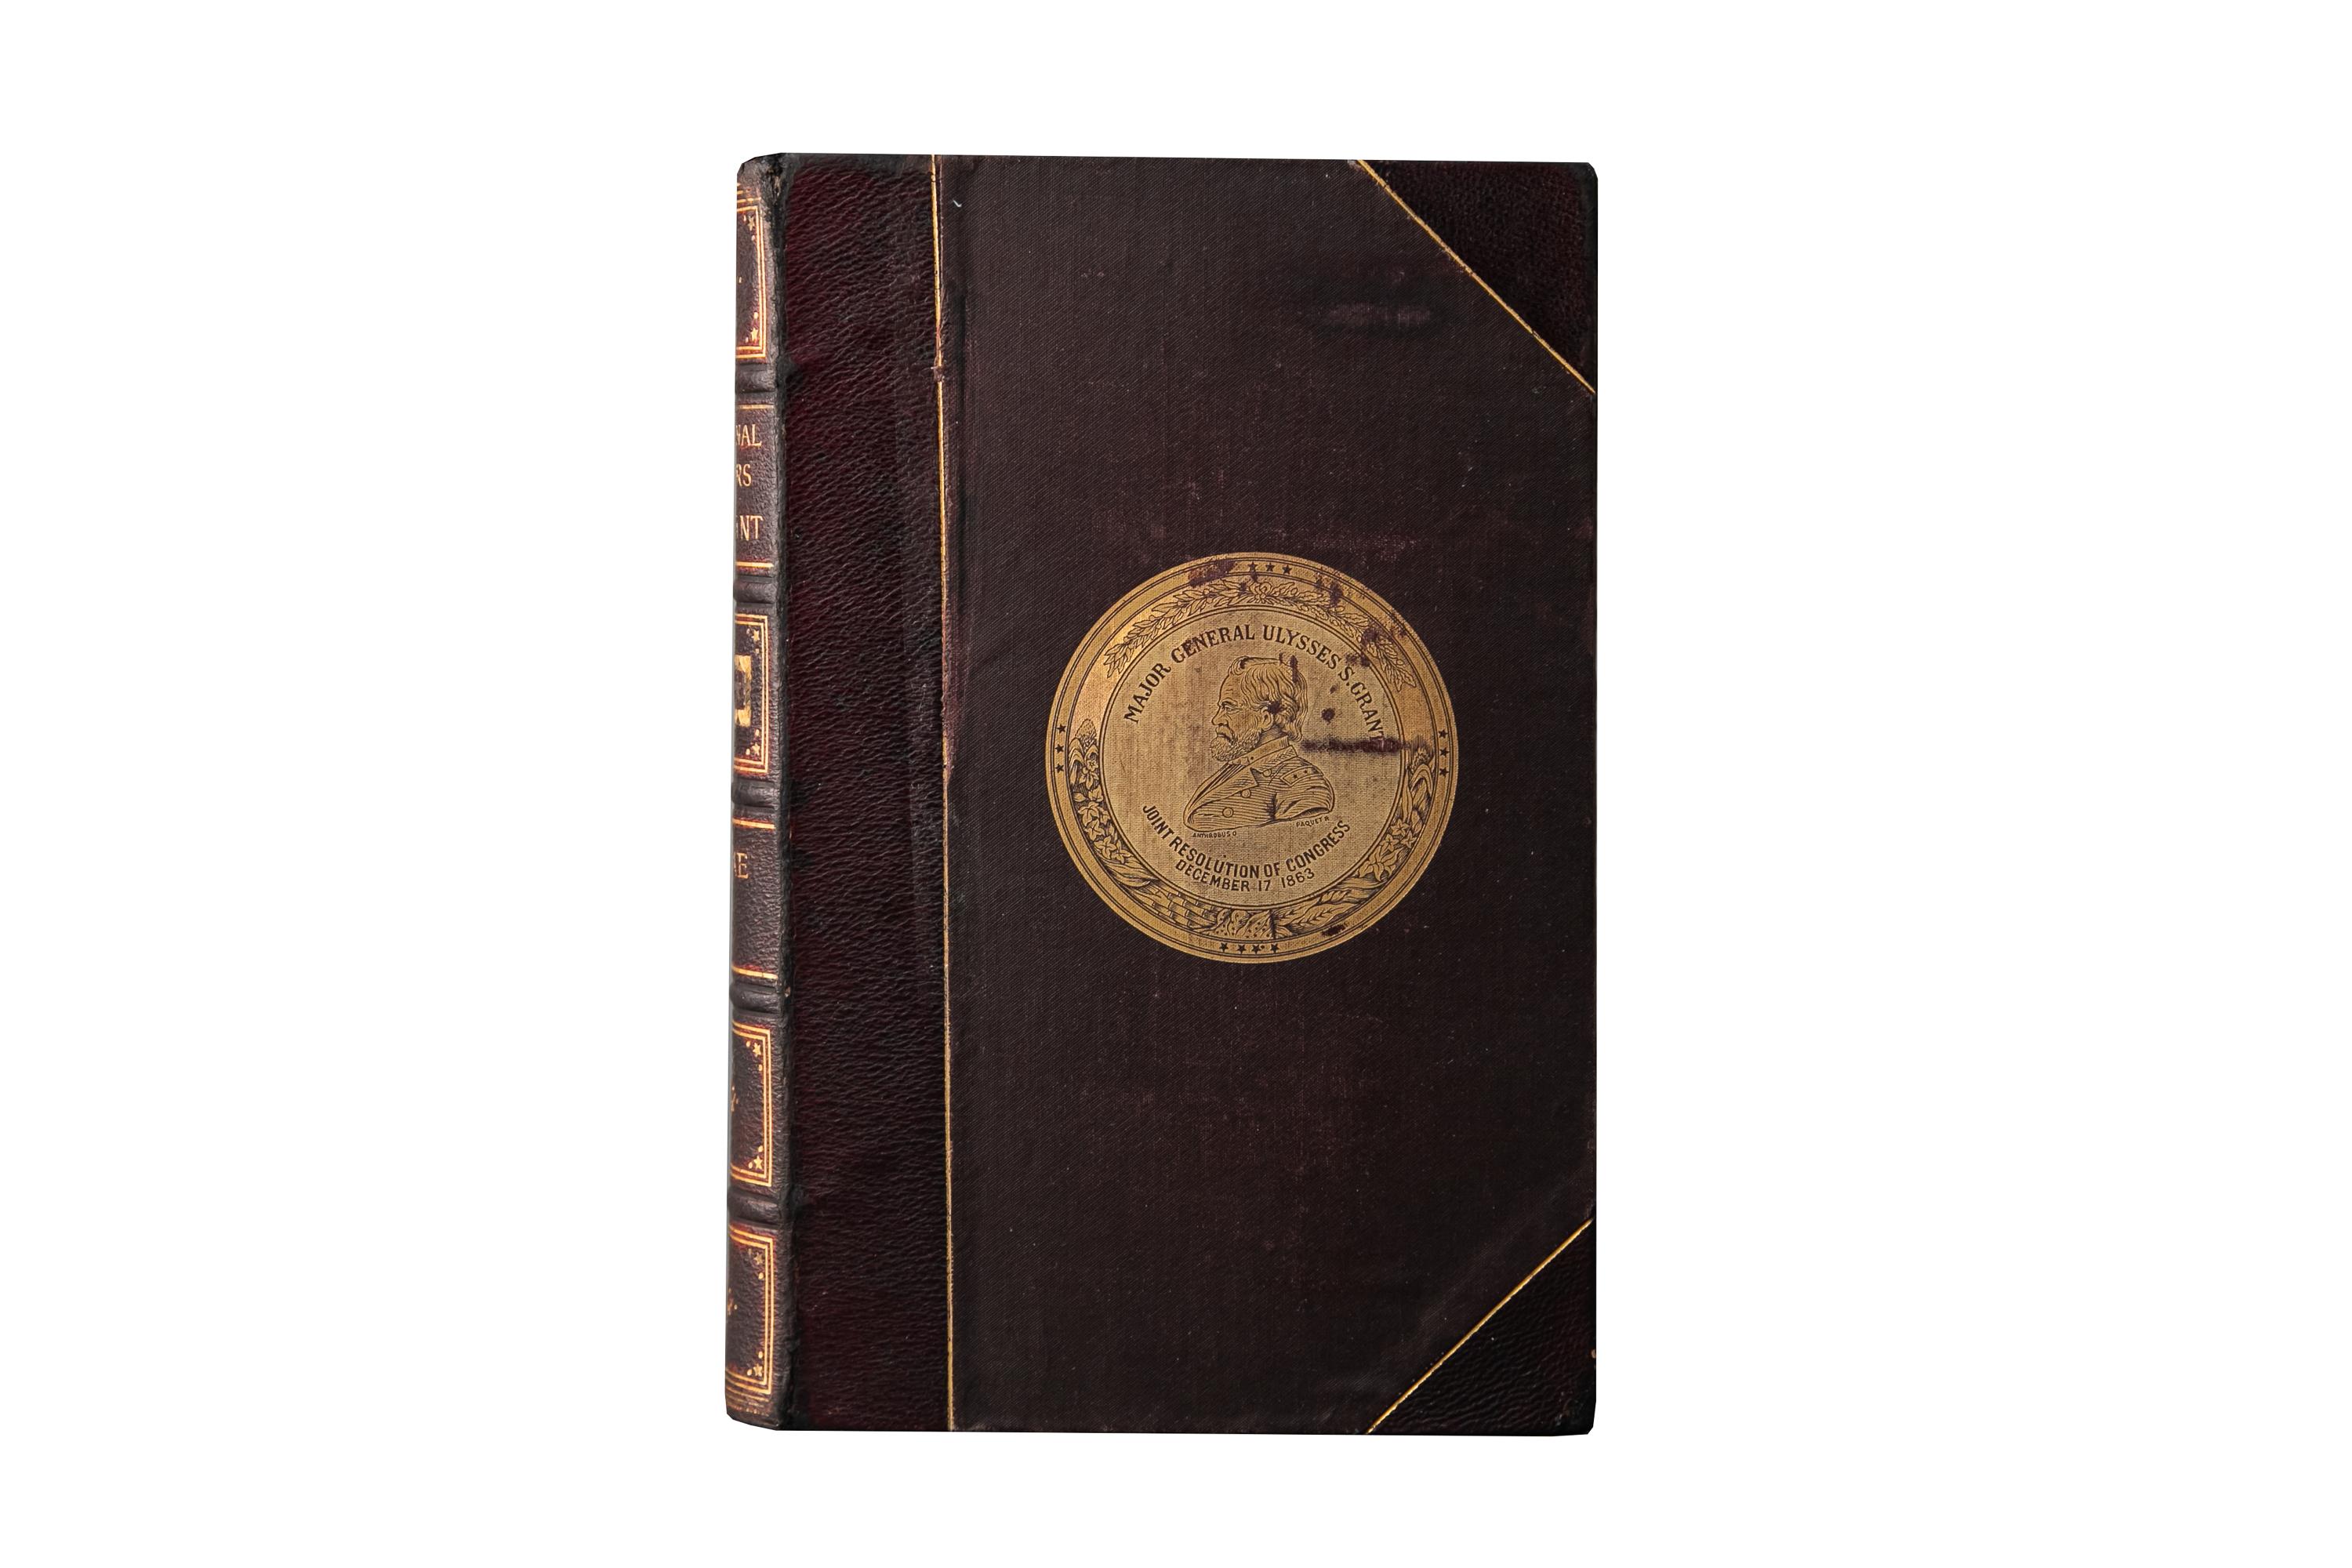 2 Volumes. U.S. Grant, Personal Memoirs. First Edition. Bound in 3/4 brown morocco and linen boards with a gilt-tooled seal on the cover. The spines display raised bands, Americana details, and label lettering, all gilt-tooled. All of the edges are